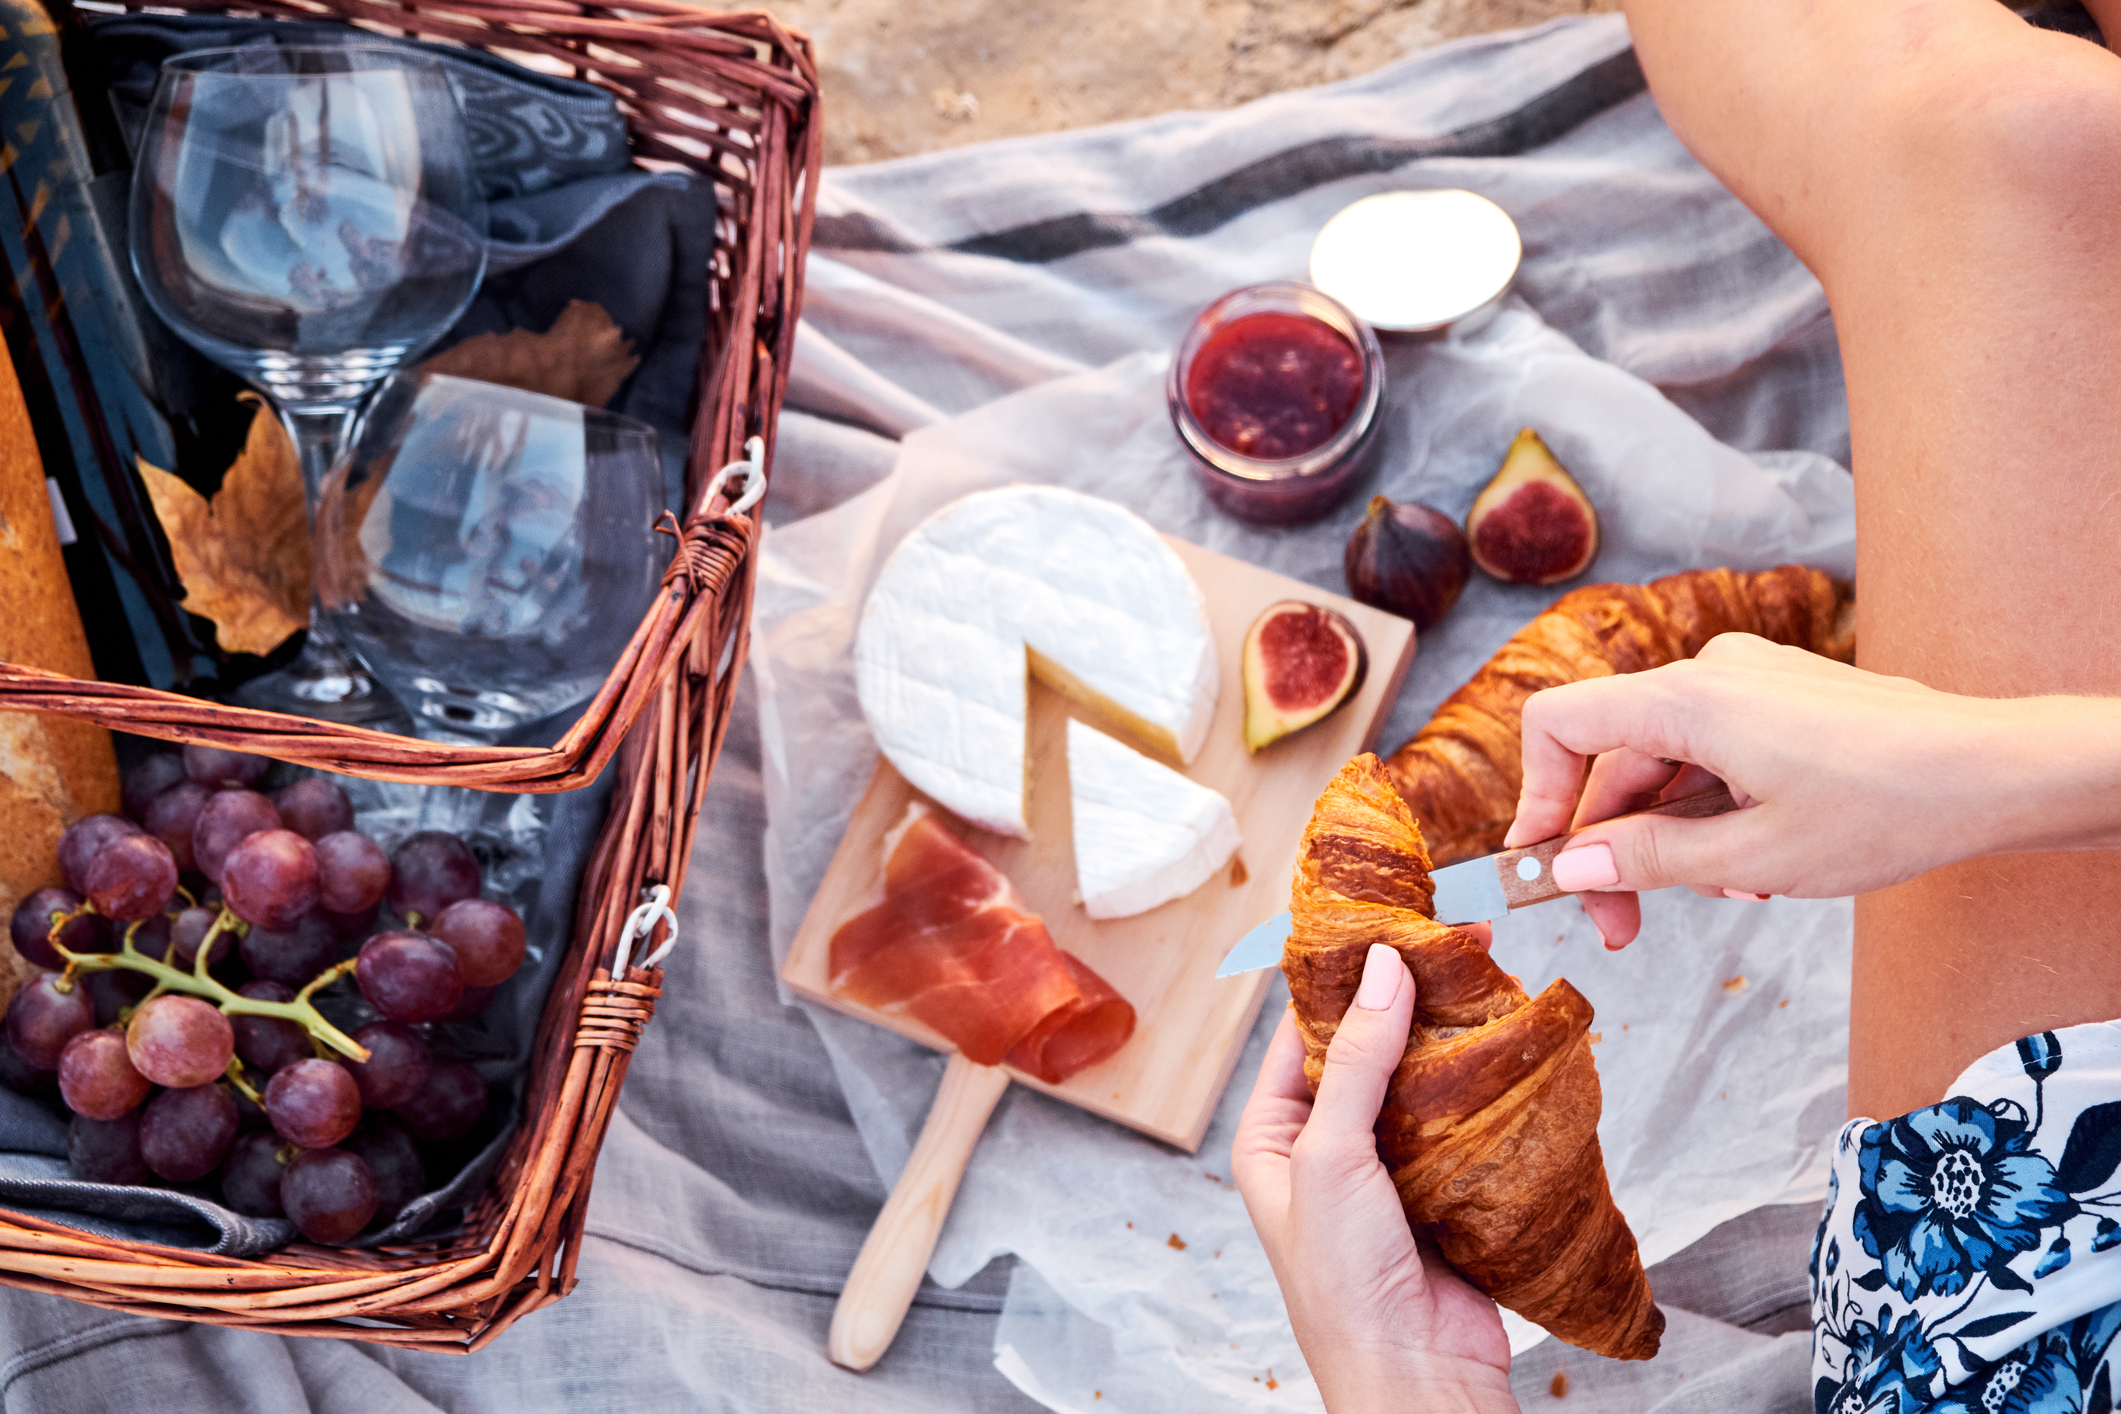 Food in a picnic basket and picnic blanket on the beach